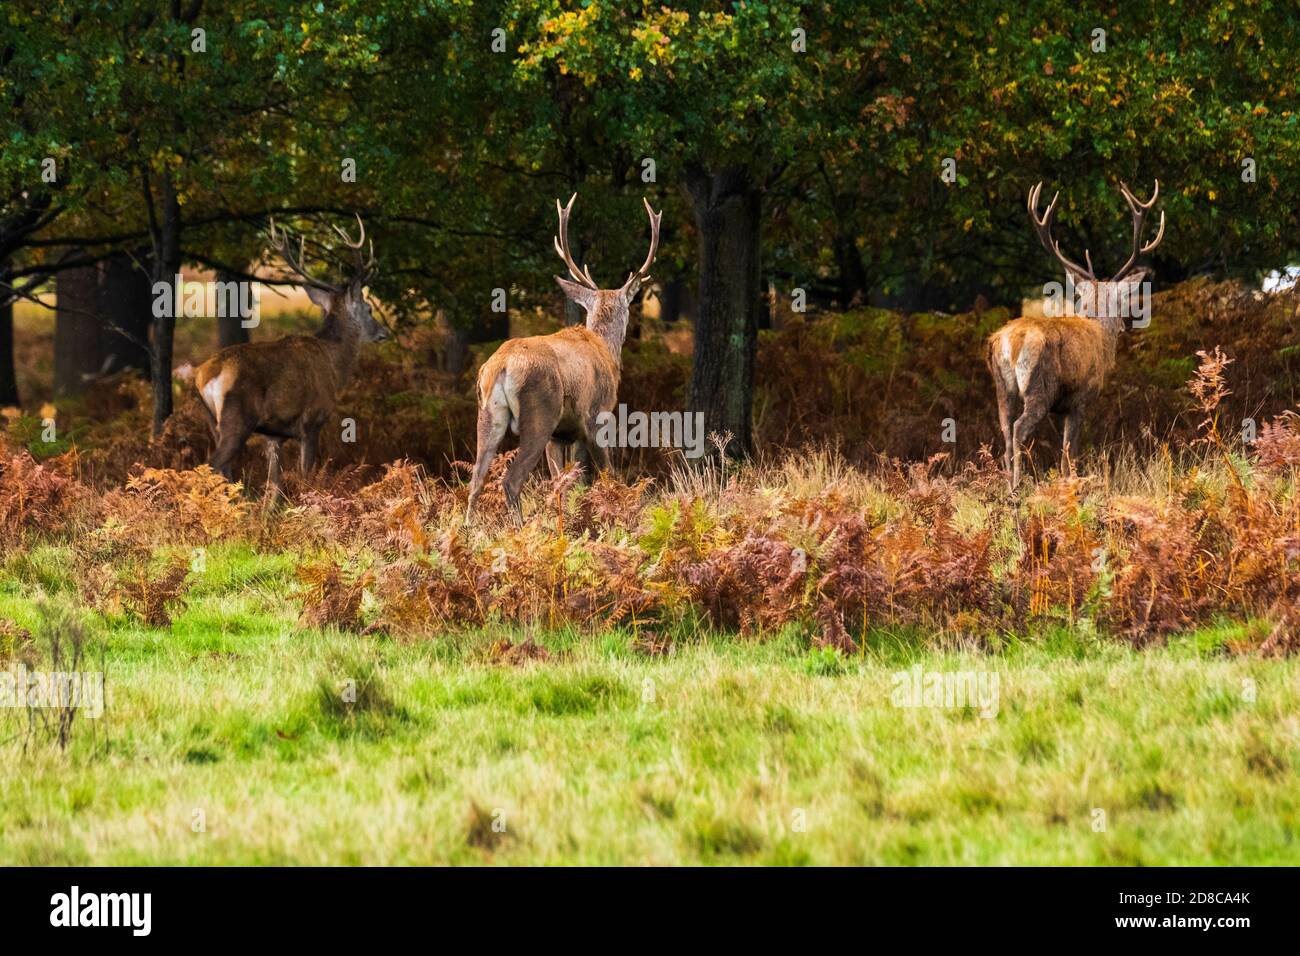 Stags and deers in Richmond park in London Stock Photo